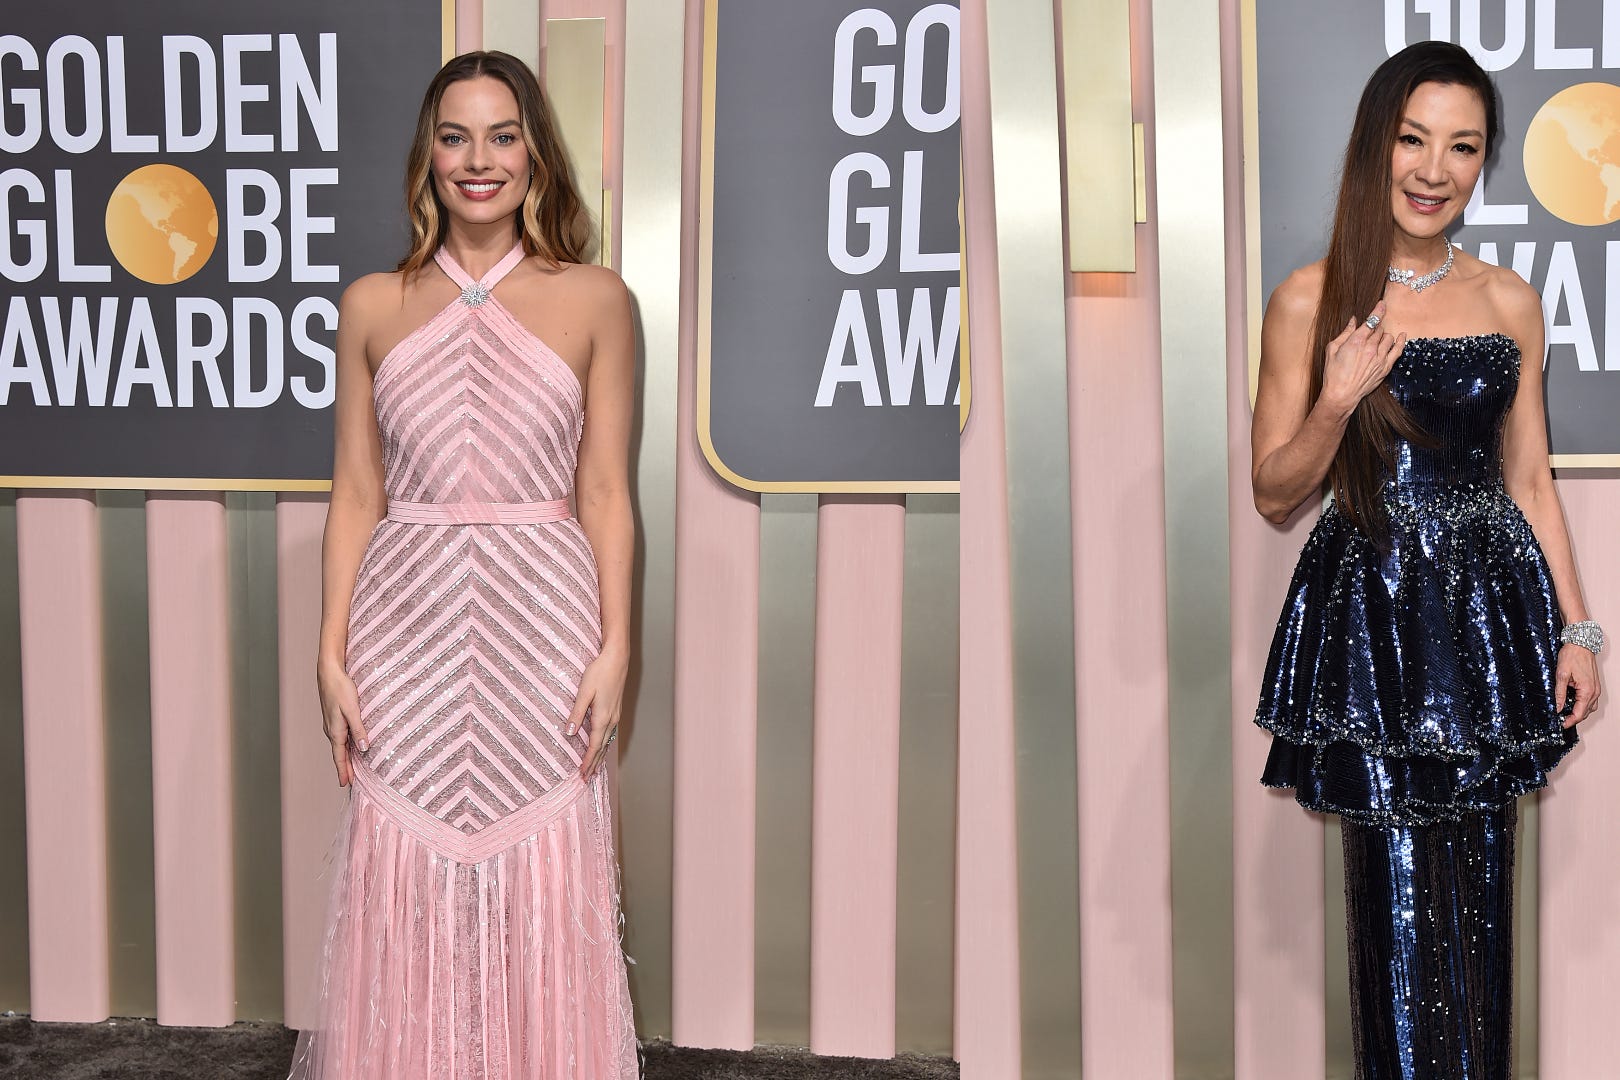 Margot Robbie: The star's Golden Globes gown took over 750 hours